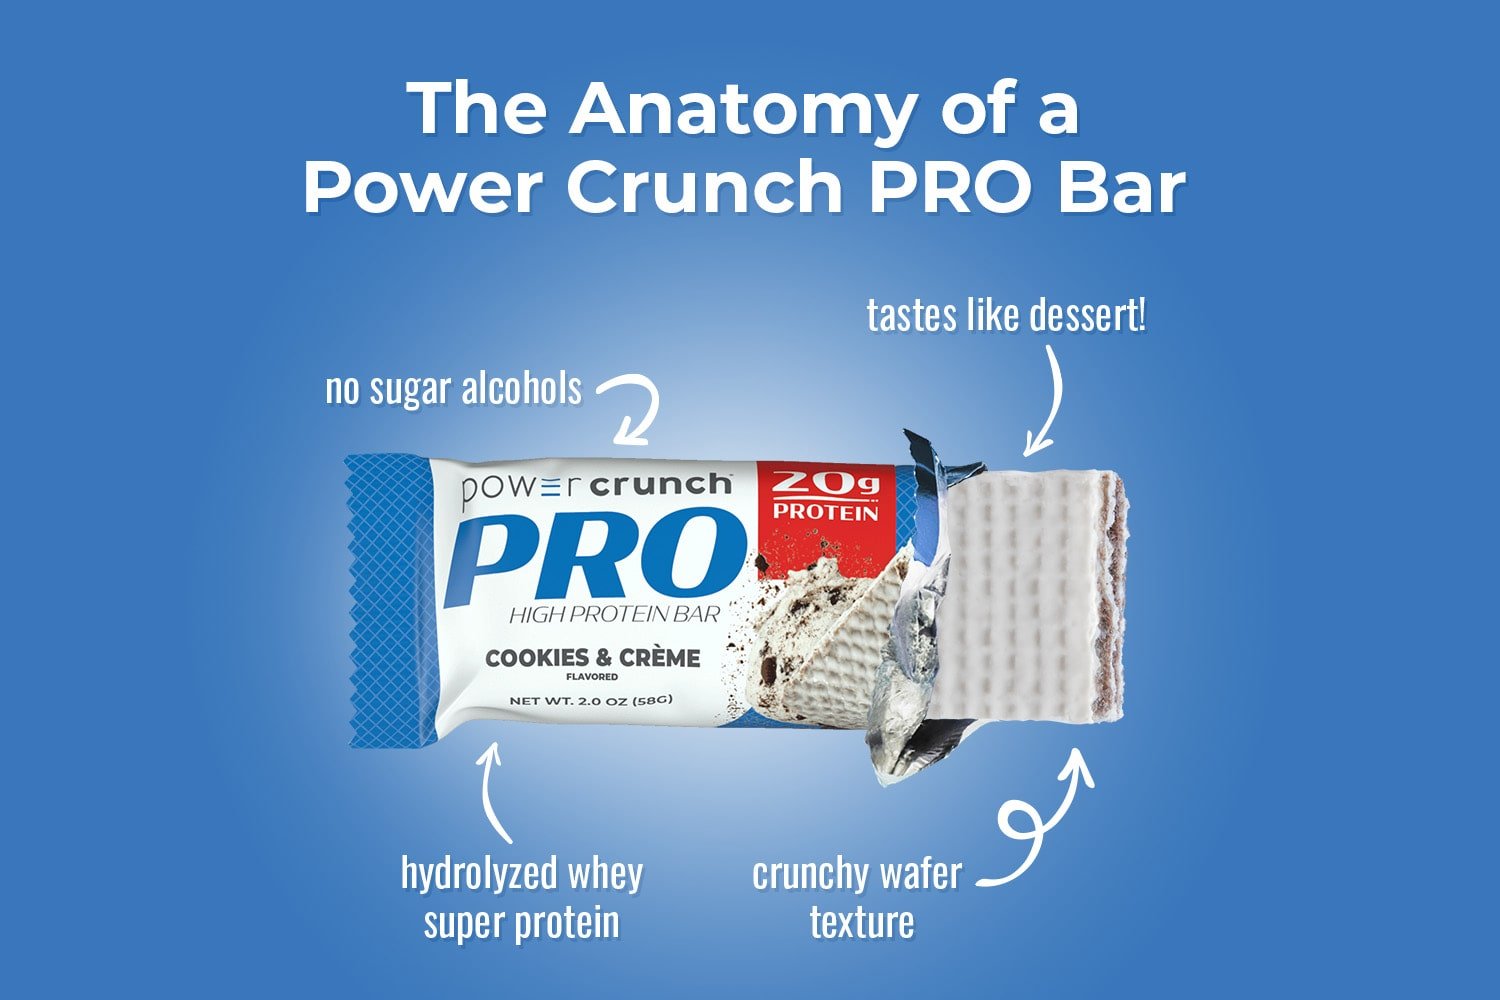 Anatomy of a Power Crunch PRO Cookies and Cream bar with hydrolyzed whey protein, crunchy wafers